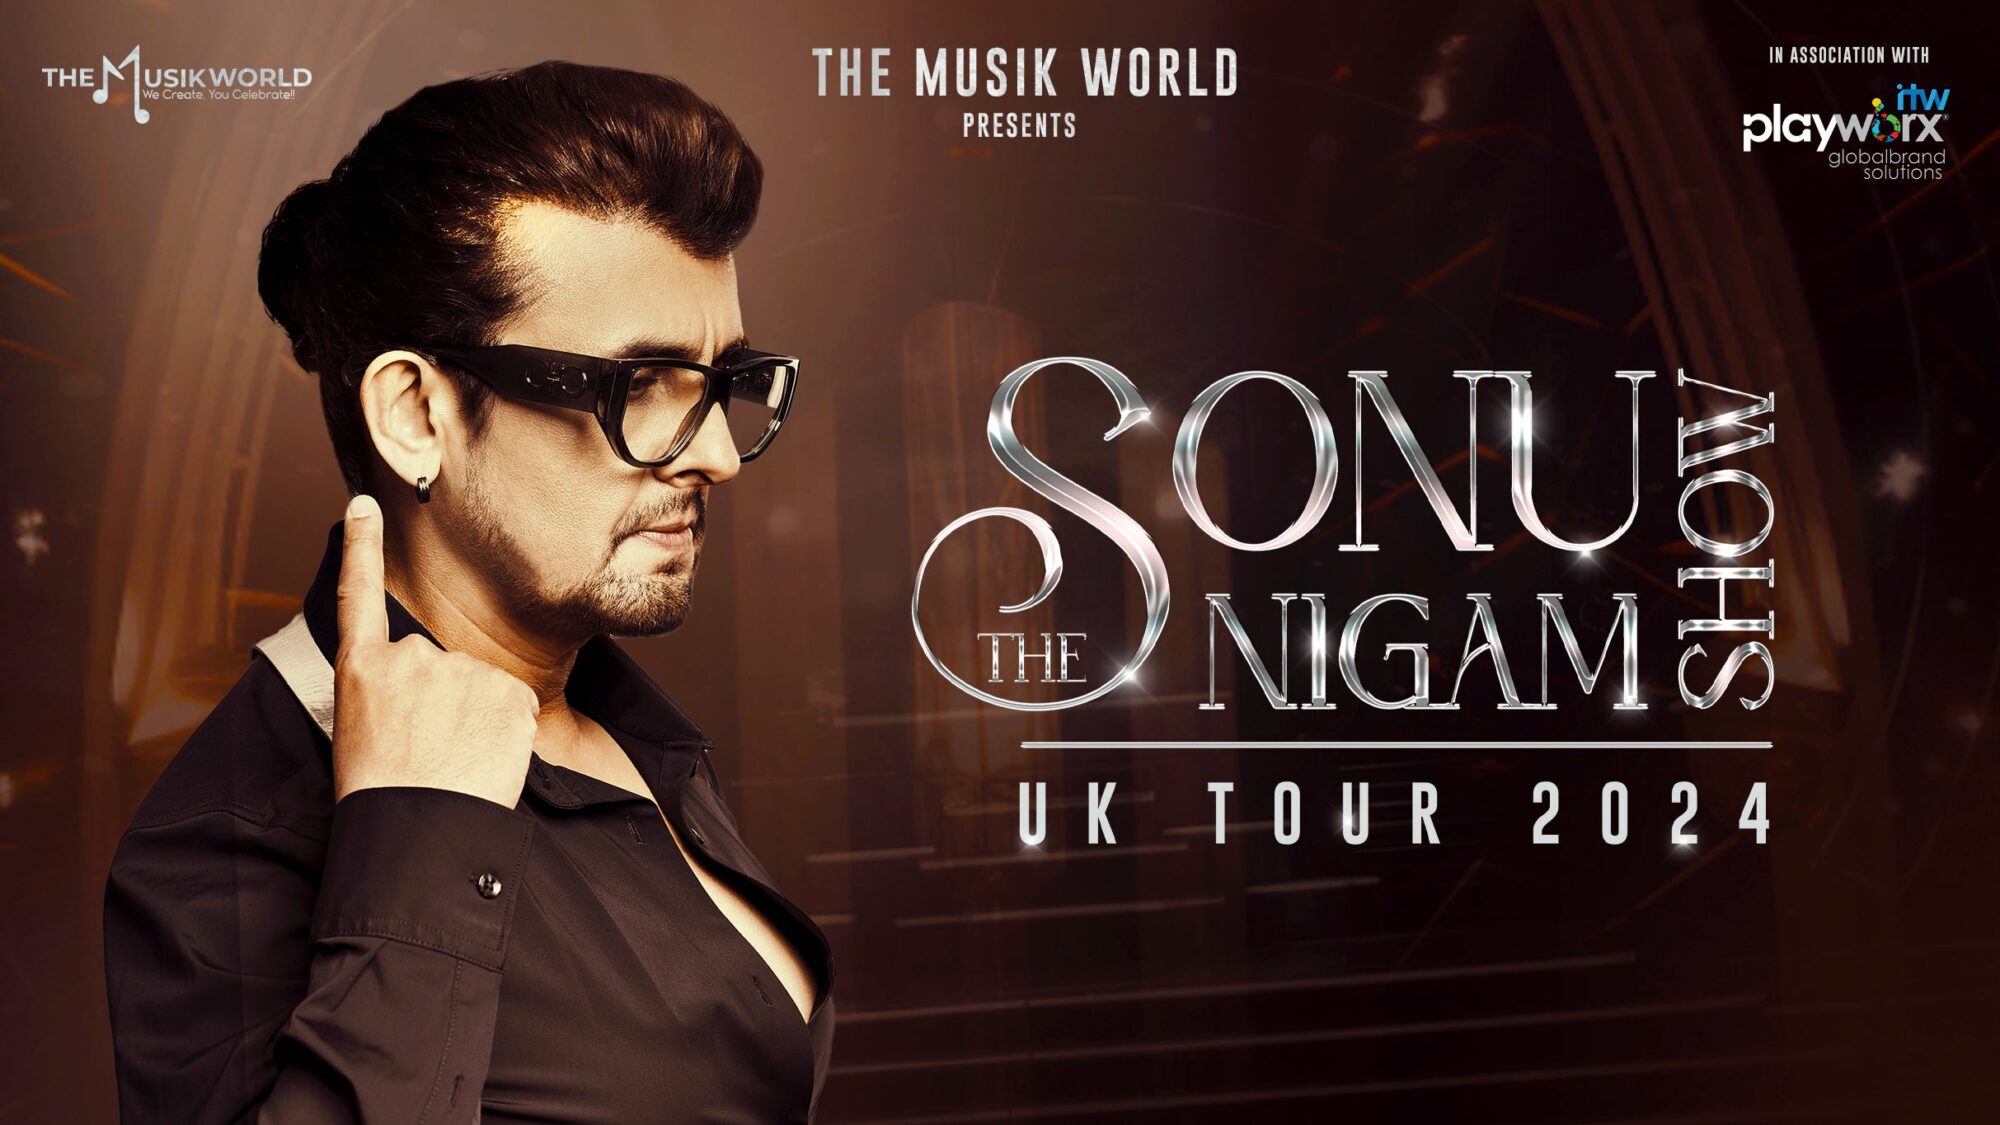 Image name Sonu Nigam at First Direct Arena Leeds the 1 image from the post Sonu Nigam - Premium Package - the Mixer at First Direct Arena, Leeds in Yorkshire.com.